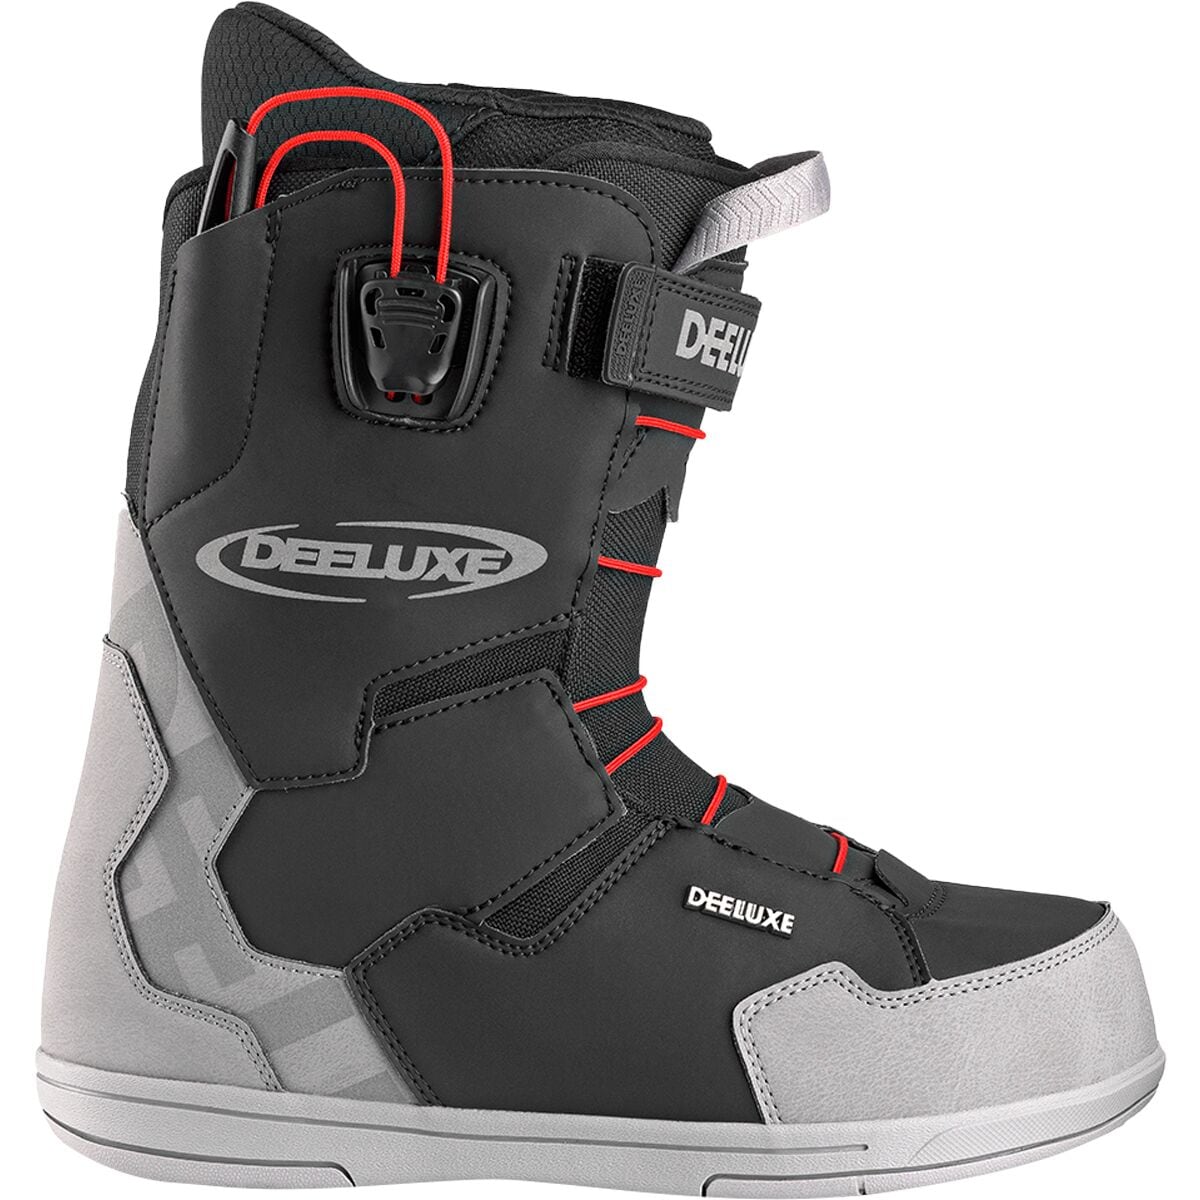 Snowboard Boots | Backcountry.com